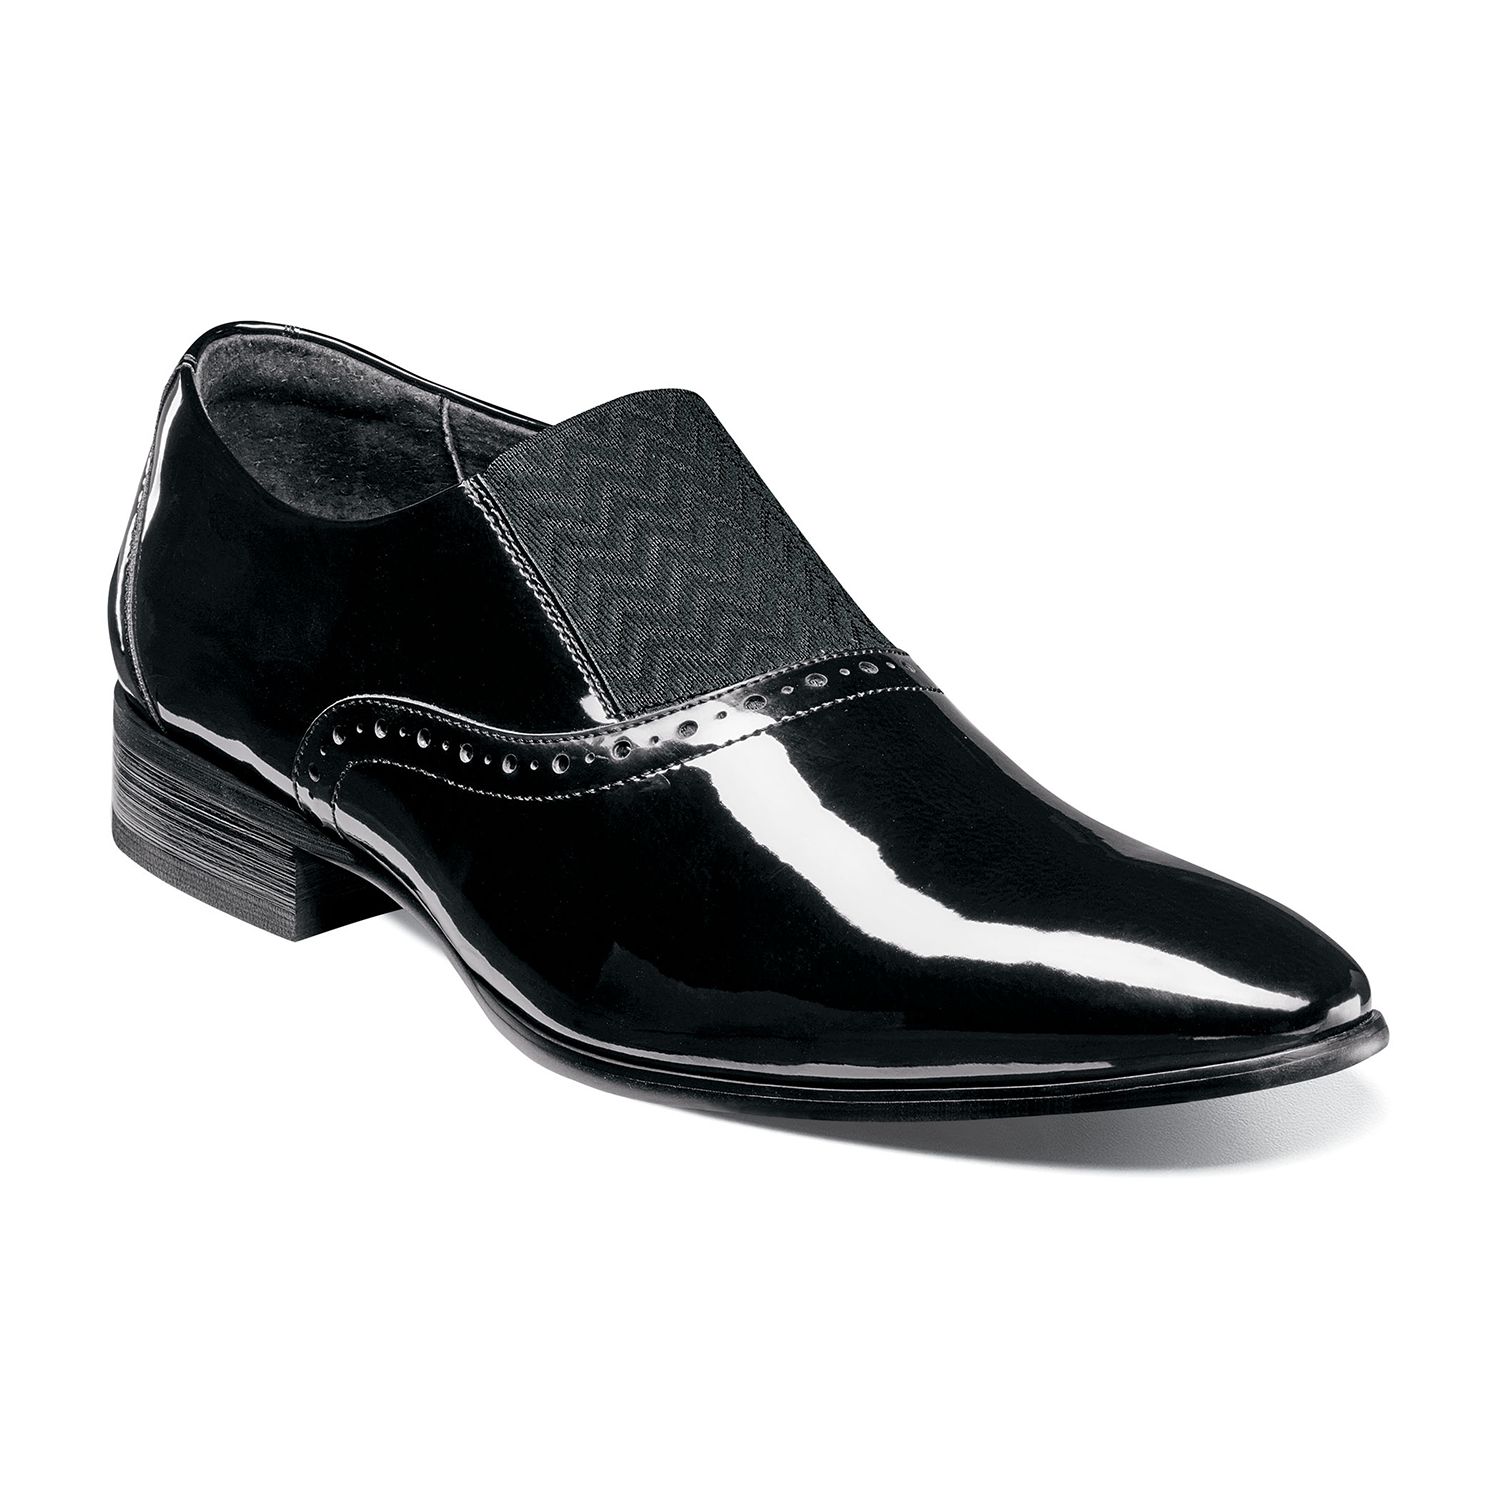 size 15 casual dress shoes